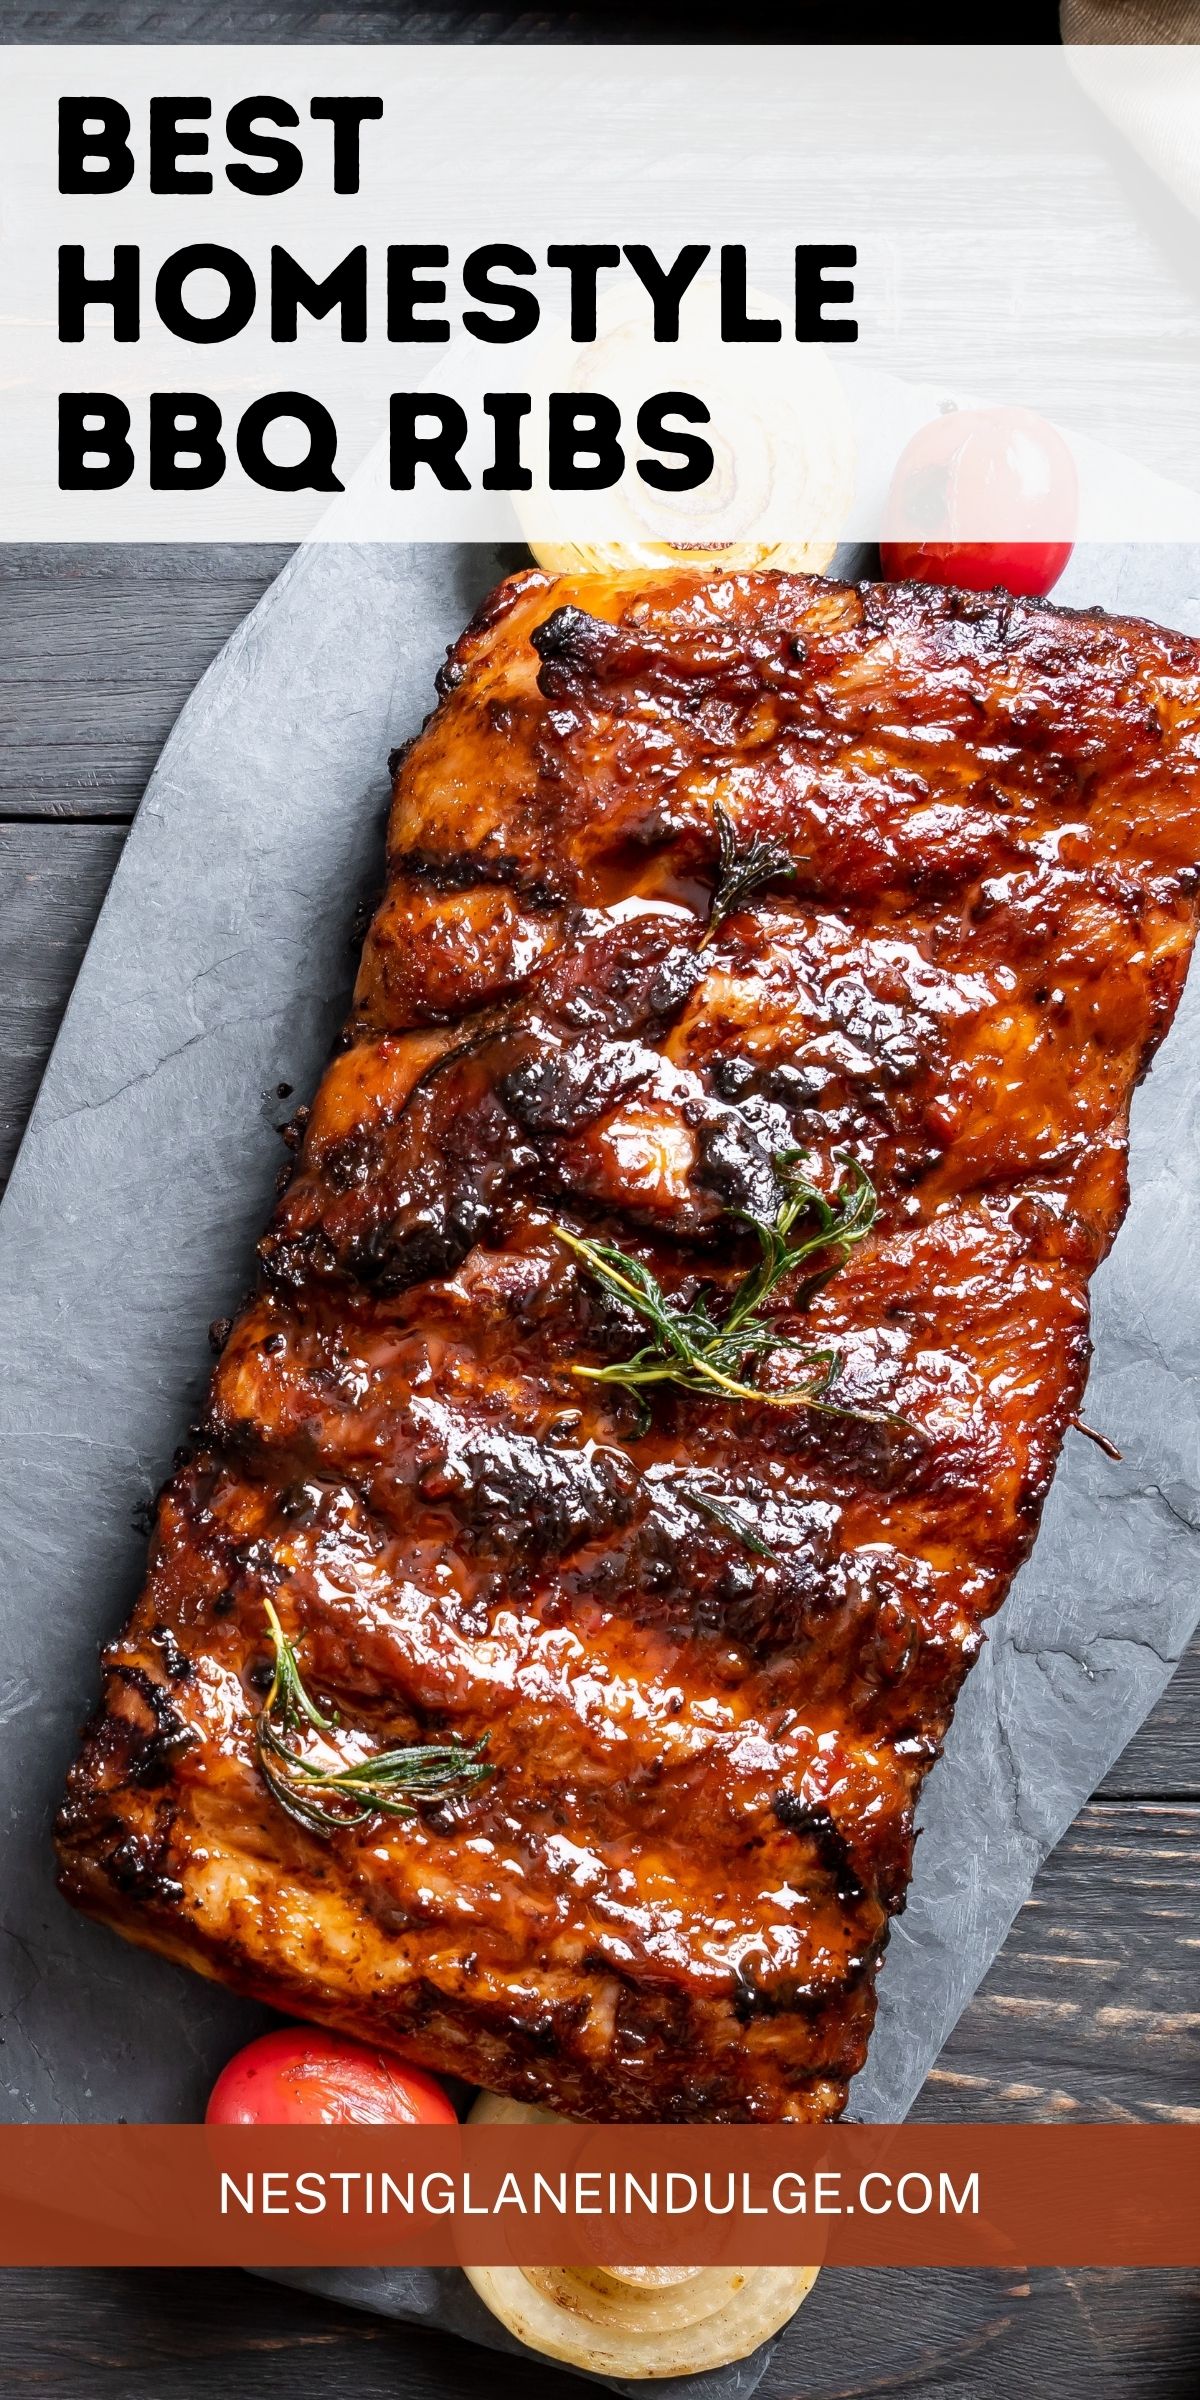 A rack of BBQ ribs with sauce on parchment, garnished with rosemary, next to onions and tomatoes on a wooden table. Text reads "Best Homestyle BBQ Ribs, NESTINGLANEINDULGE.COM."